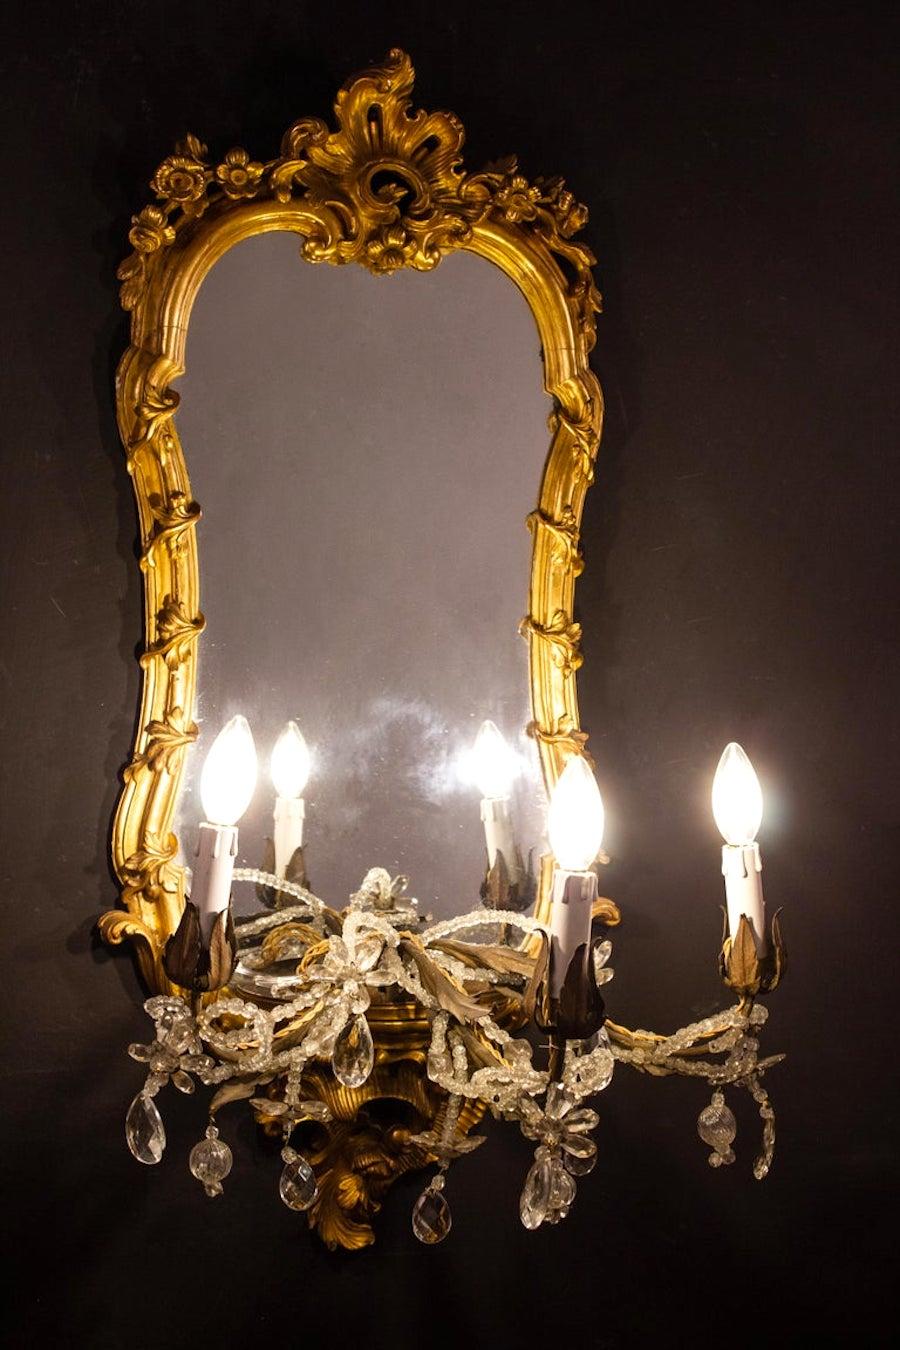 Wonderful pair 18th century finely carved and giltwood mirrors with three candle arms, Roma, 1750.
The candle arms can also be removed and used as a base for a vase or porcelain sculpture.
Original gilding in very good condition. 
Available 4